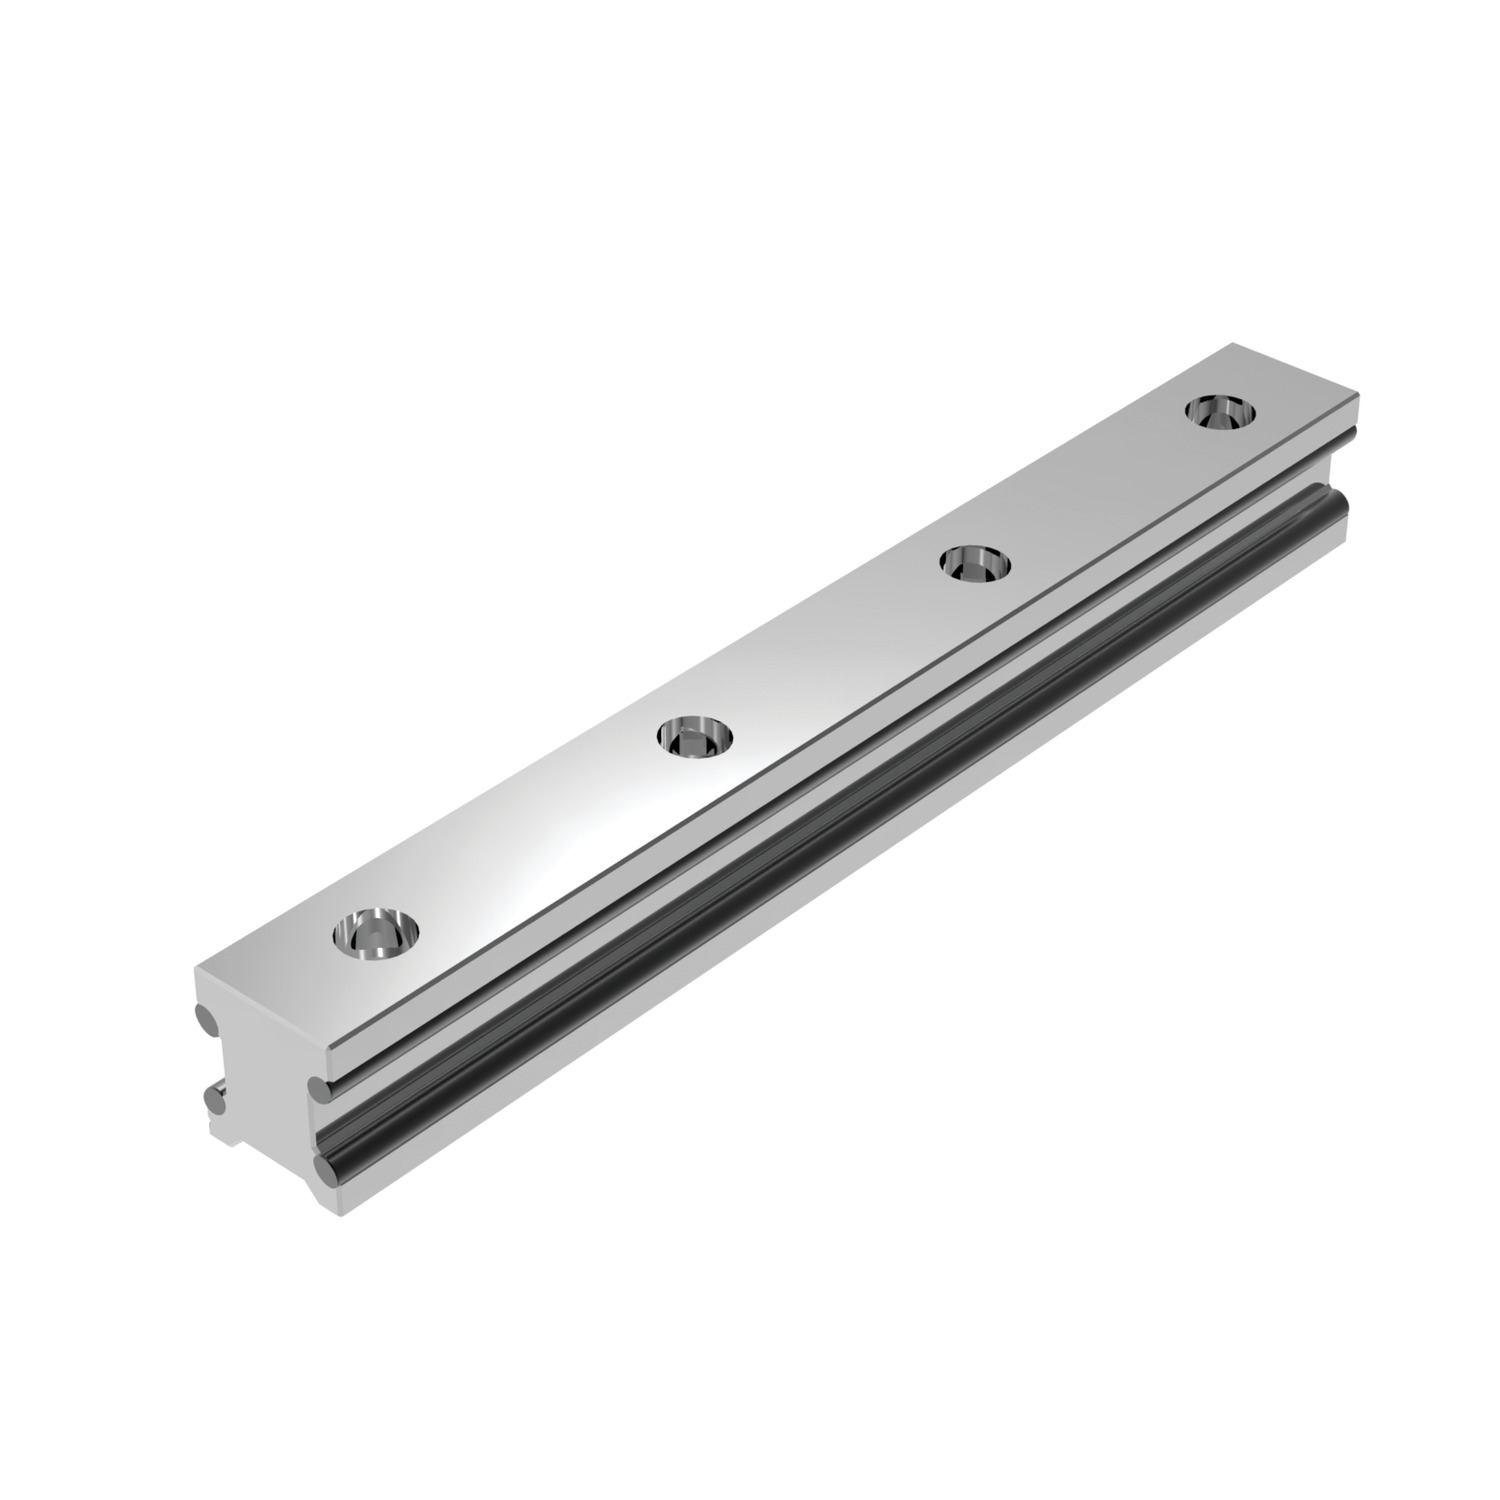 15mm Aluminium Linear Guide Rail Aluminium linear rails with hardened stainless steel raceways: 15, 20 and 25mm. These are lightweight rails with stainless steel inserts that ensure performance with a weight saving of up to 60% compared to steel versions.